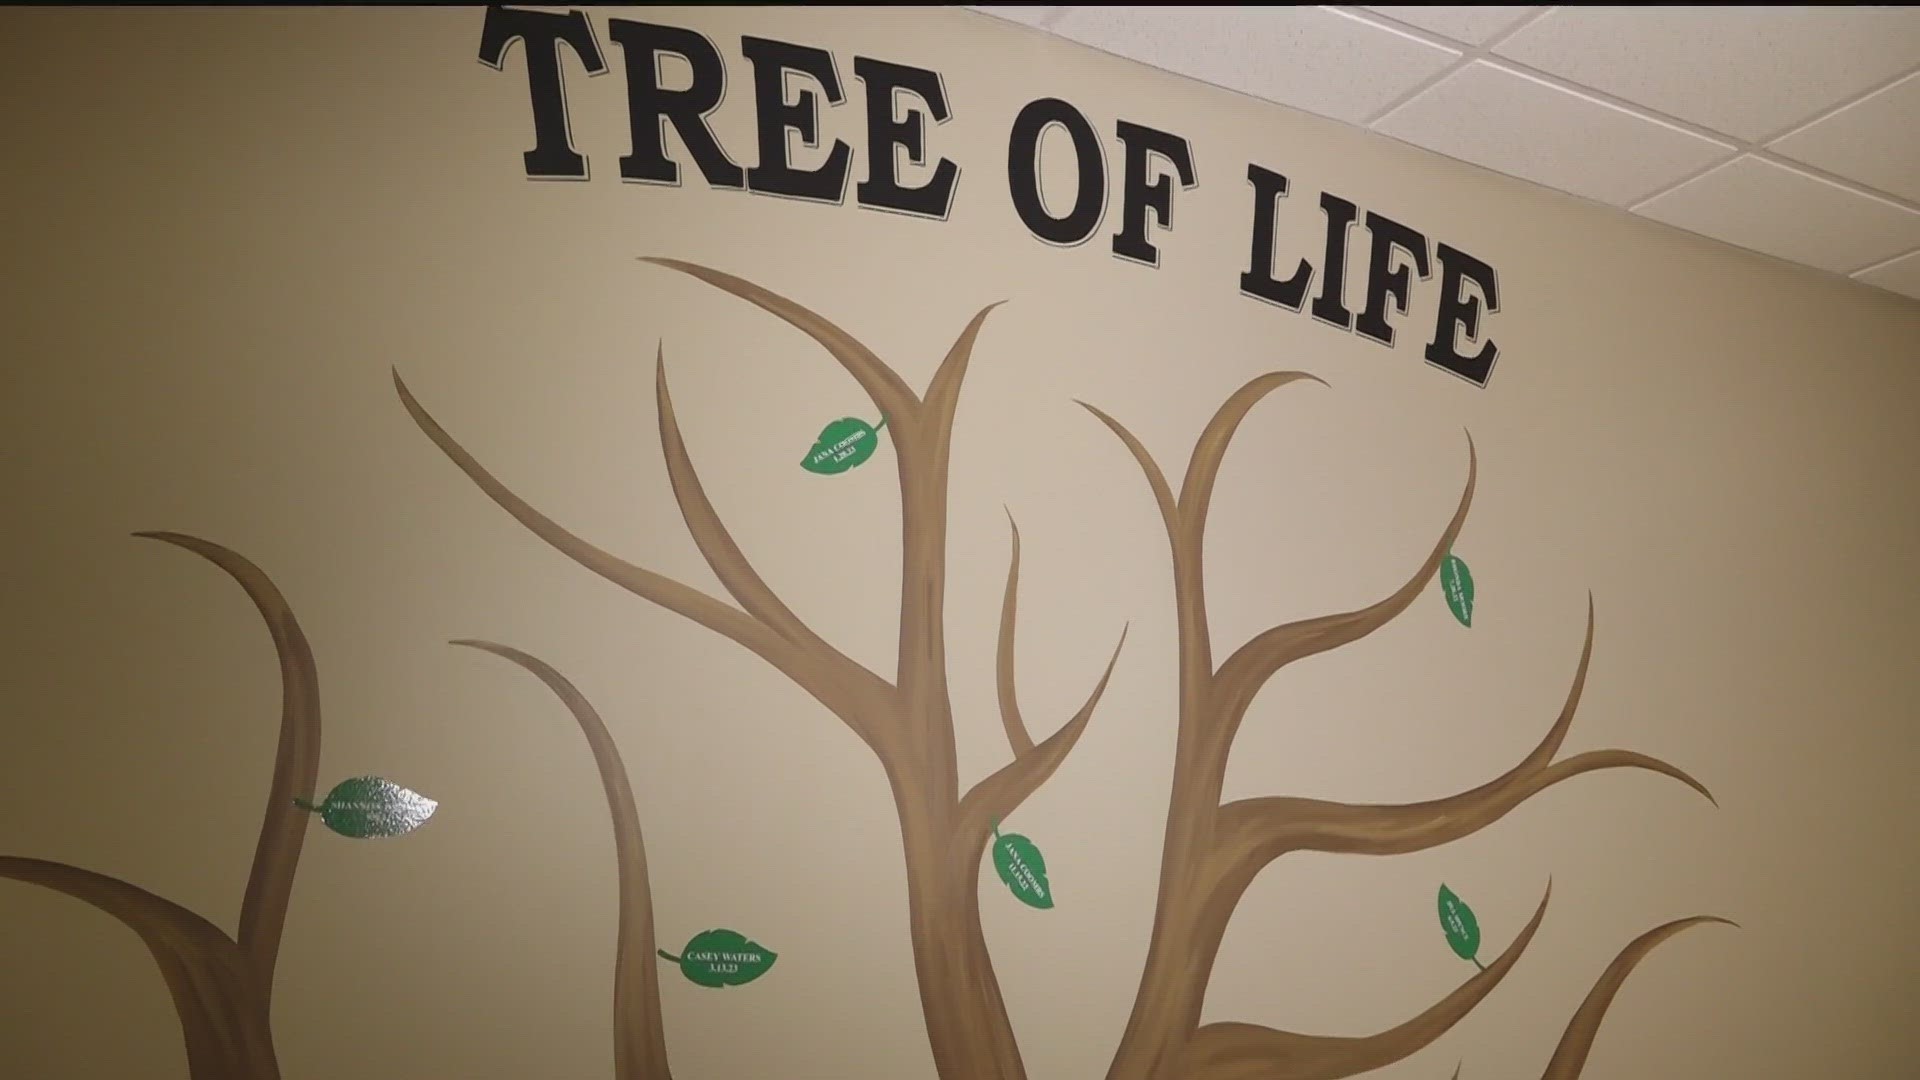 Each leaf on the 'Tree of Life' represents a life-changing call. They're looking forward to seeing how it grows.